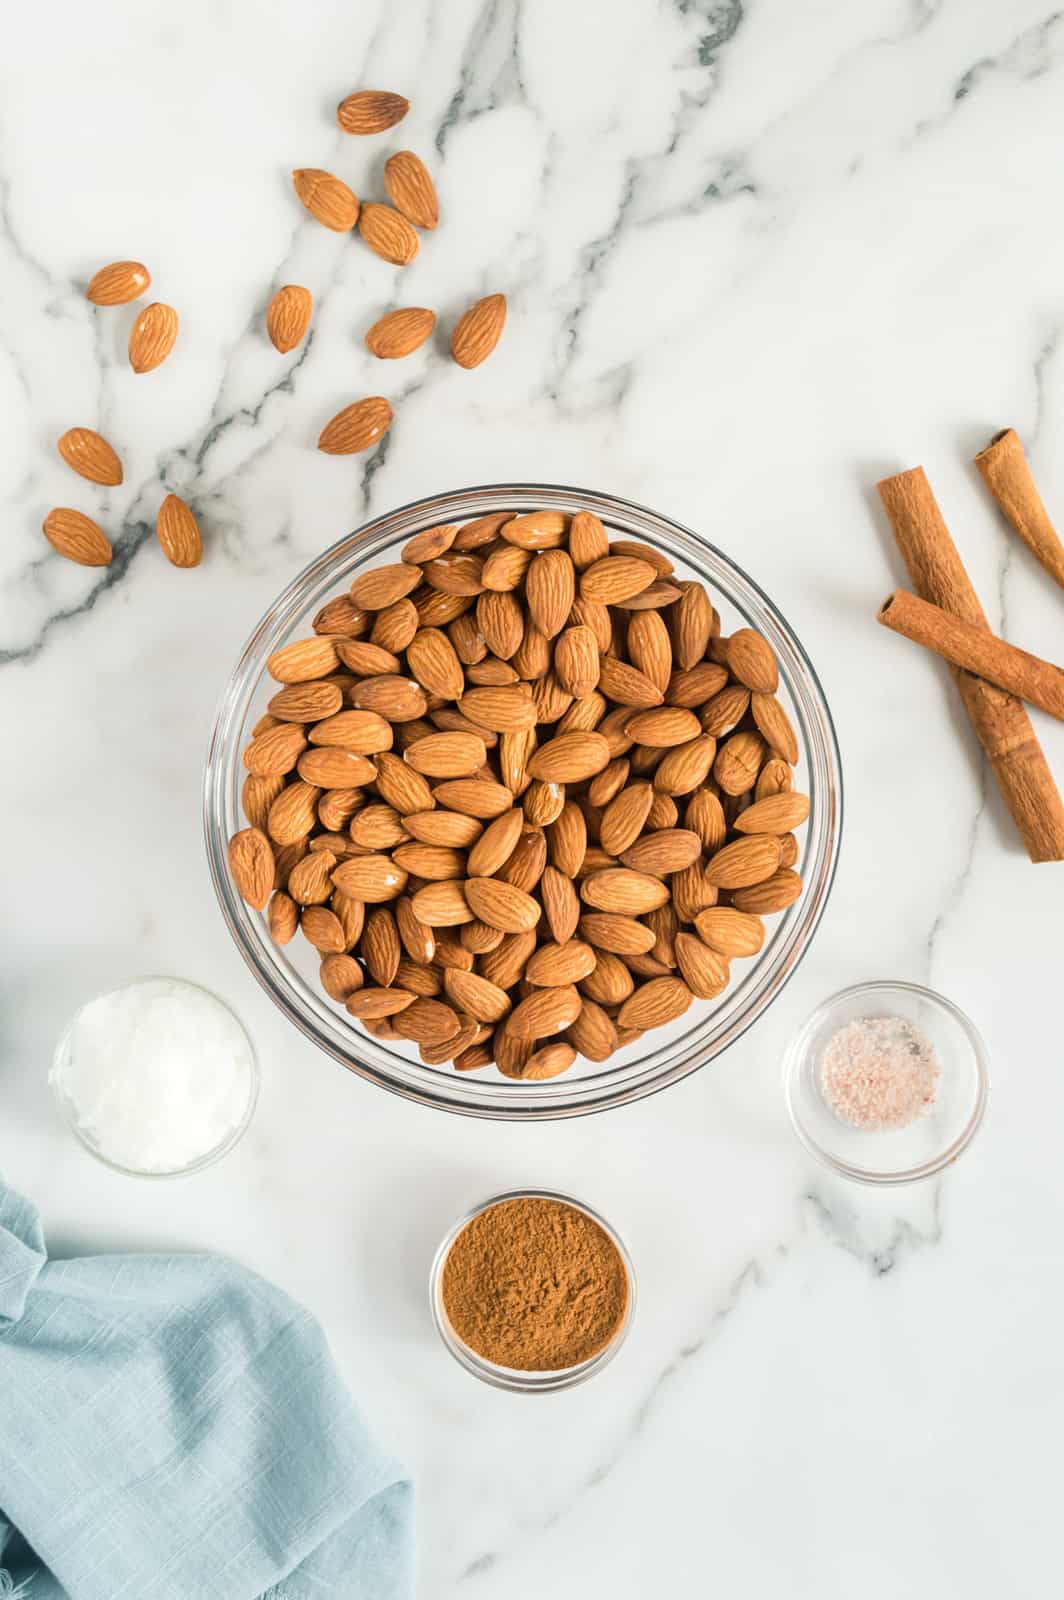 Ingredients needed to make Cinnamon Almond Butter